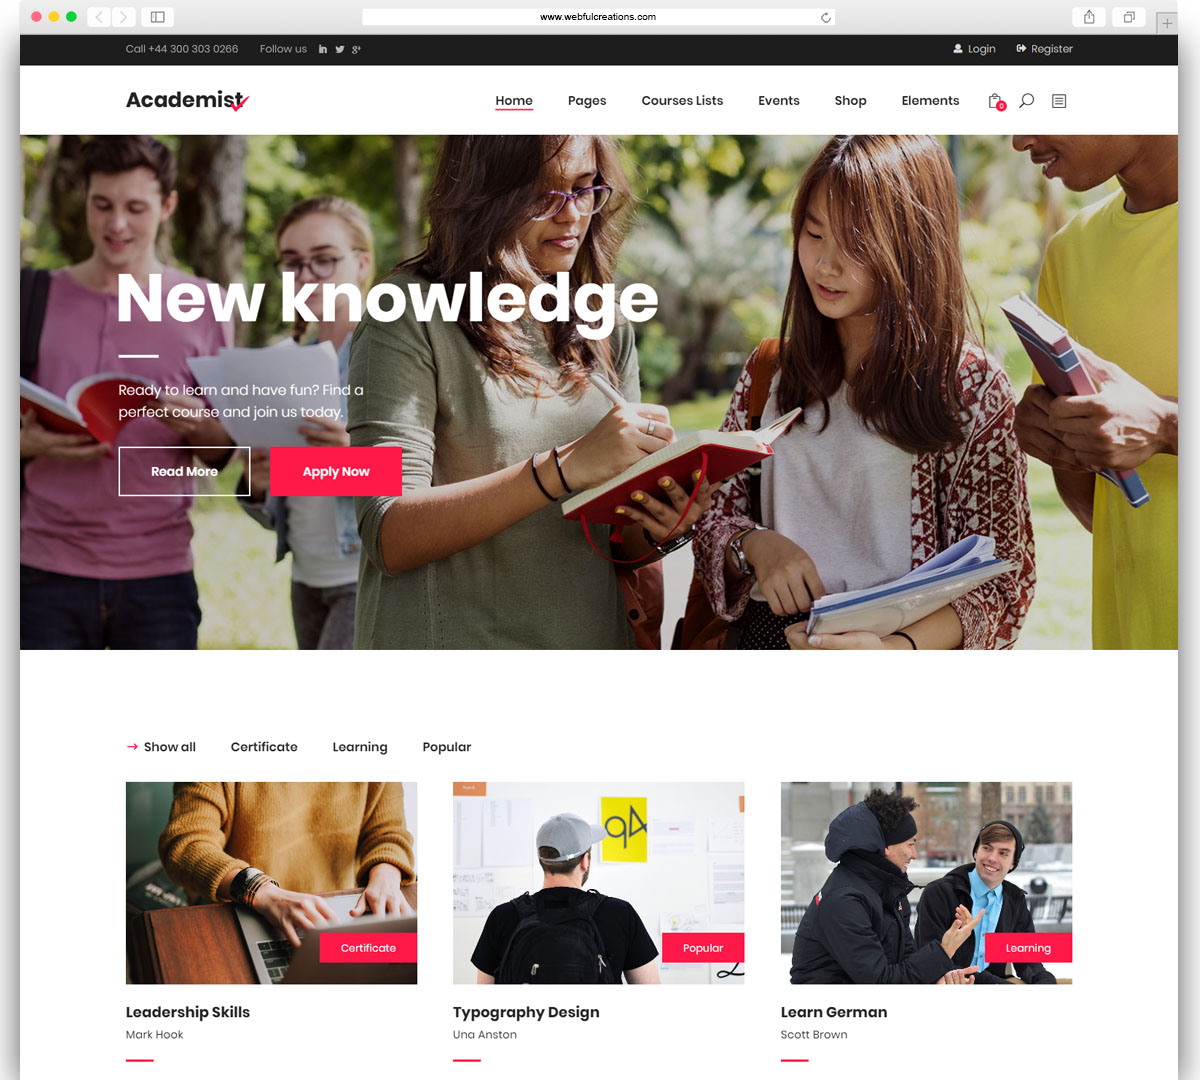 Academist - Modern Education and Learning Management System Theme